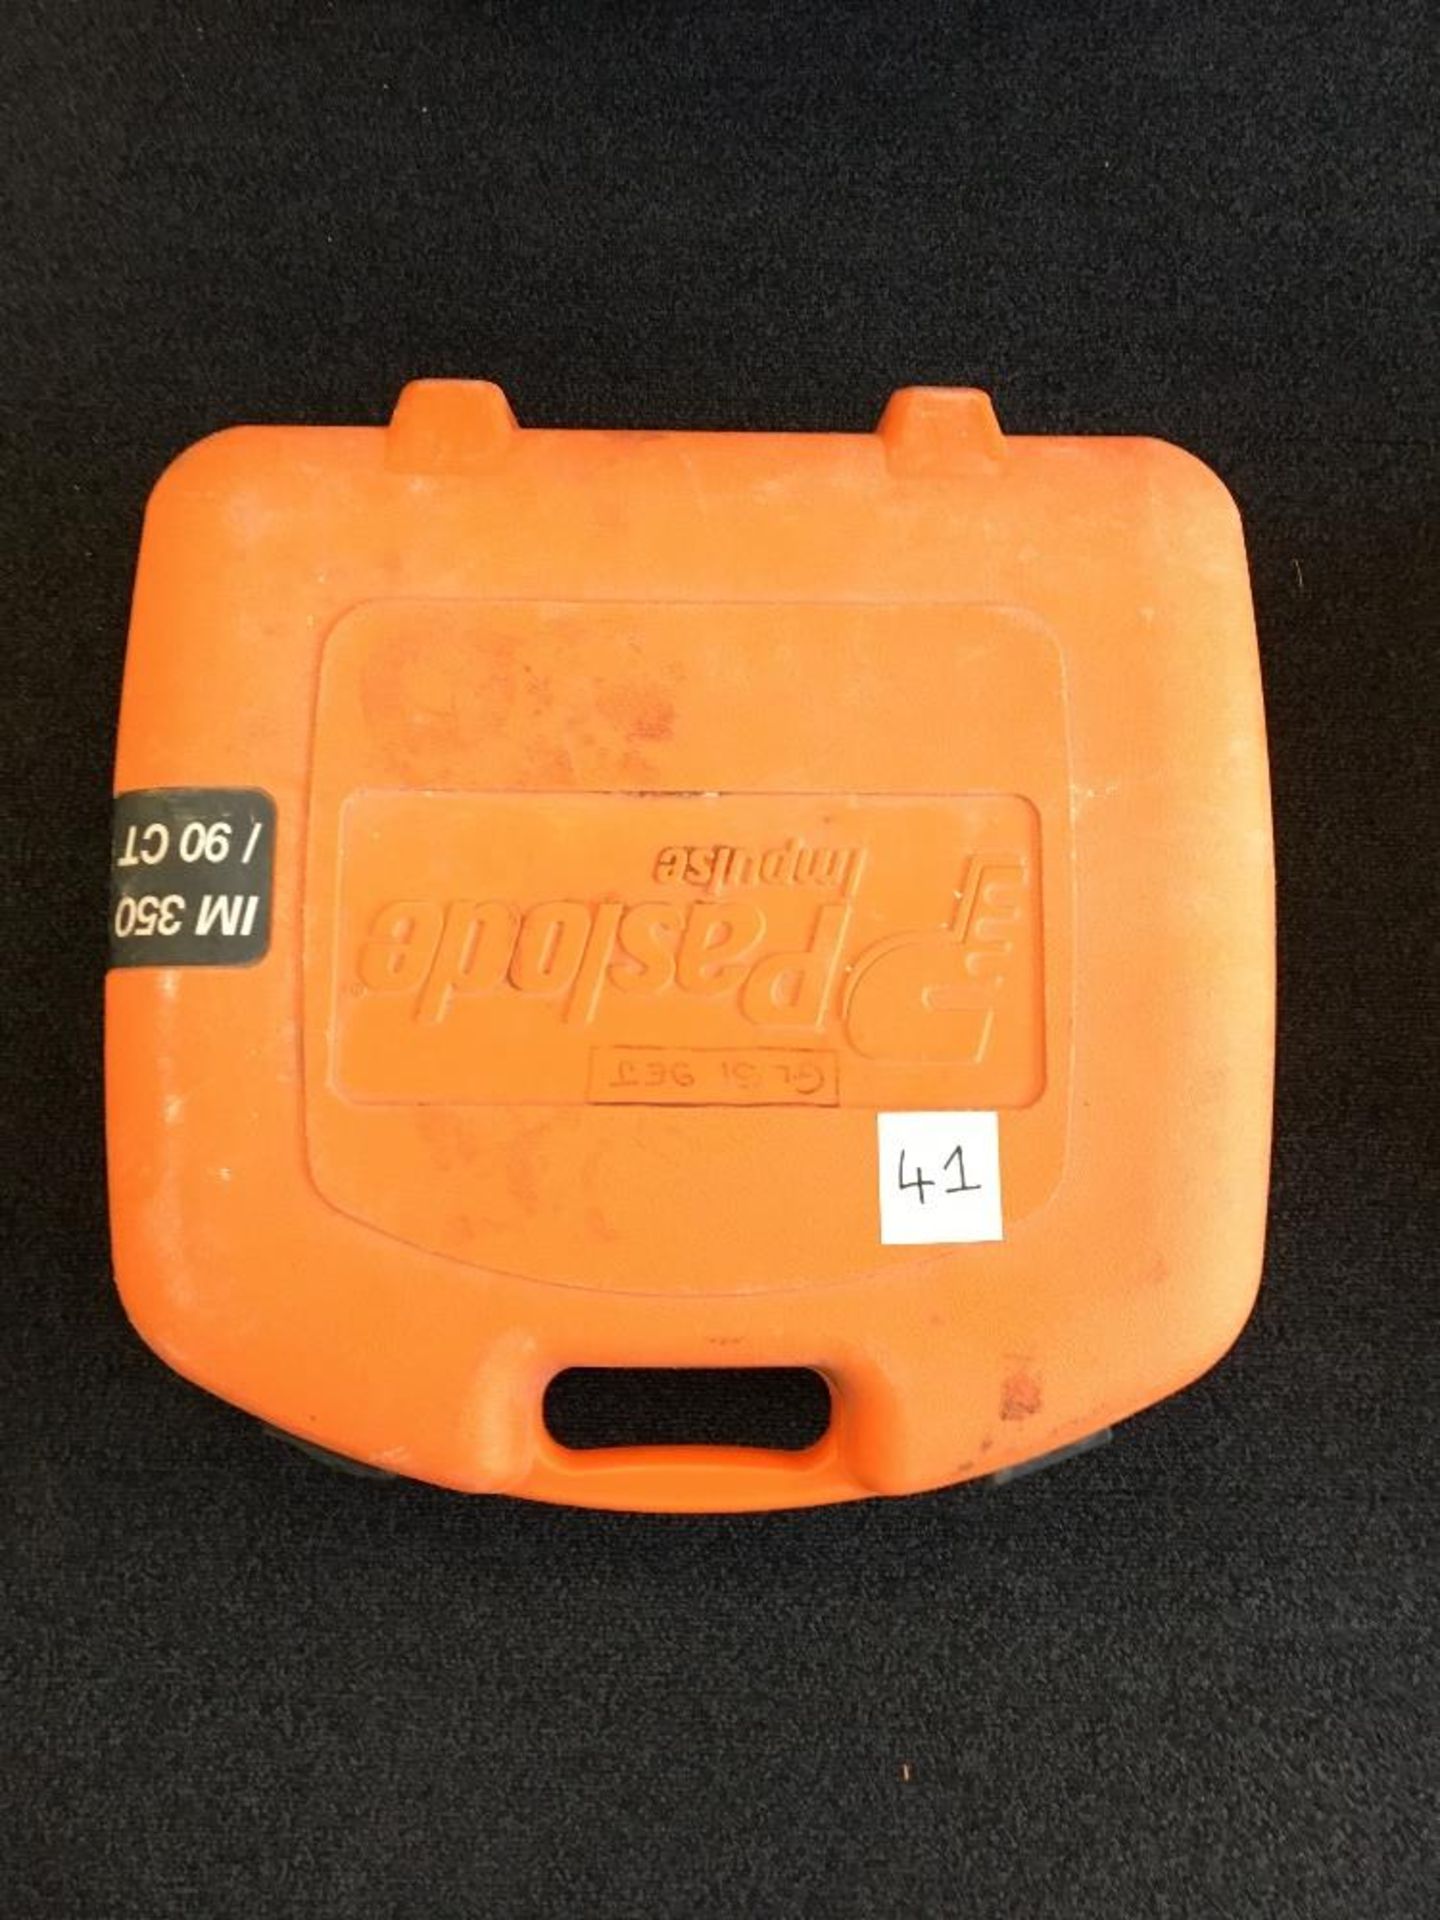 Paslode IM350/90CT Nailgun with carry case - Image 2 of 4